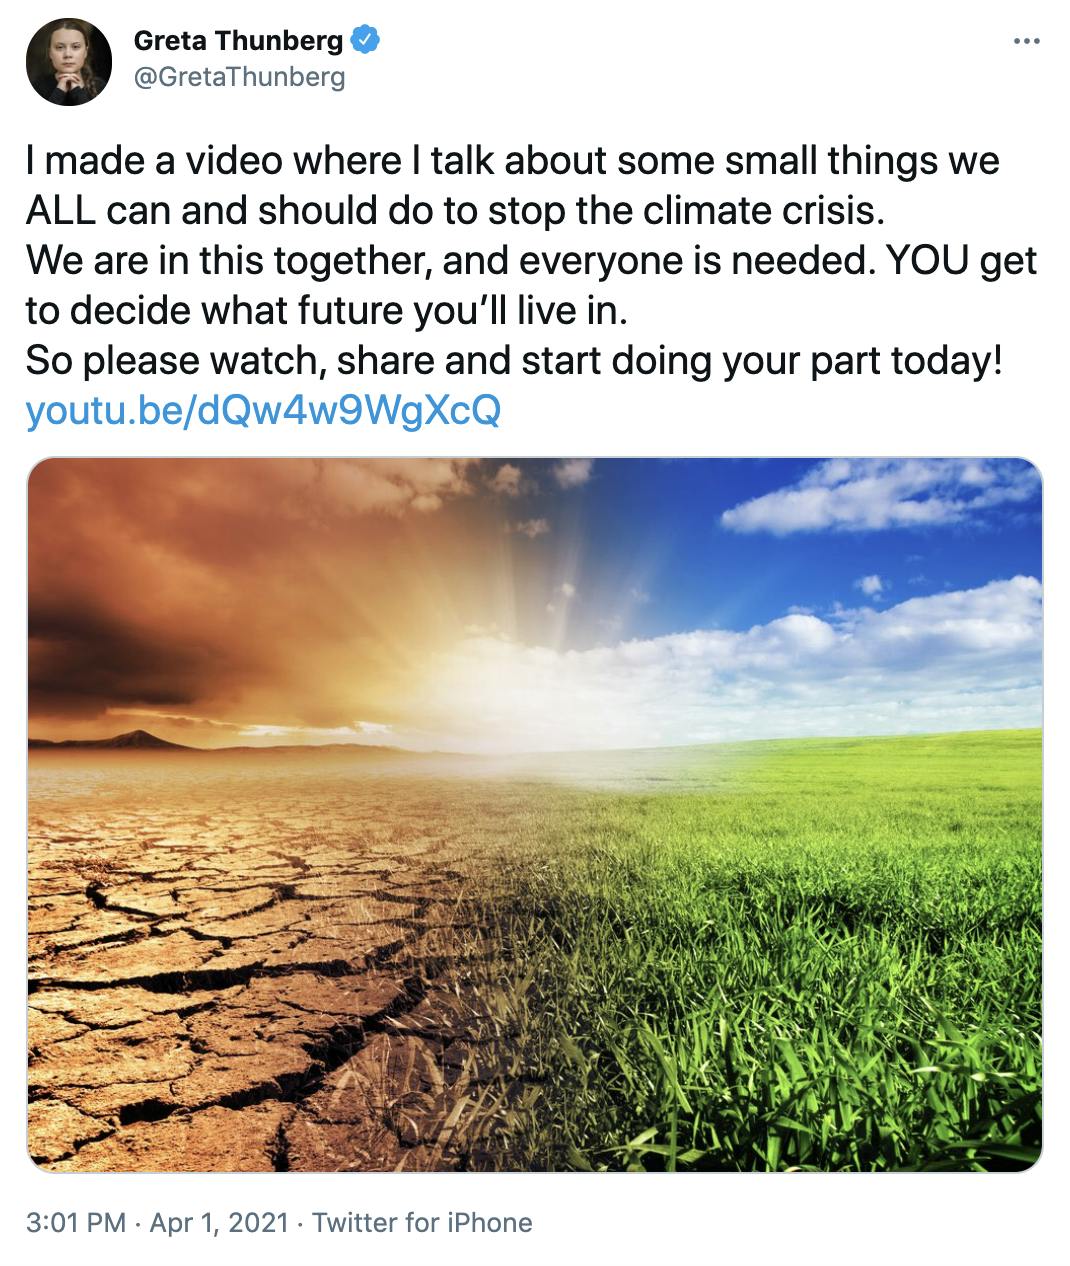 'I made a video where I talk about some small things we ALL can and should do to stop the climate crisis. We are in this together, and everyone is needed. YOU get to decide what future you’ll live in. So please watch, share and start doing your part today! https://youtu.be/dQw4w9WgXcQ' picture of dried up earth under an orange sky turning grassy beneath a blue sky